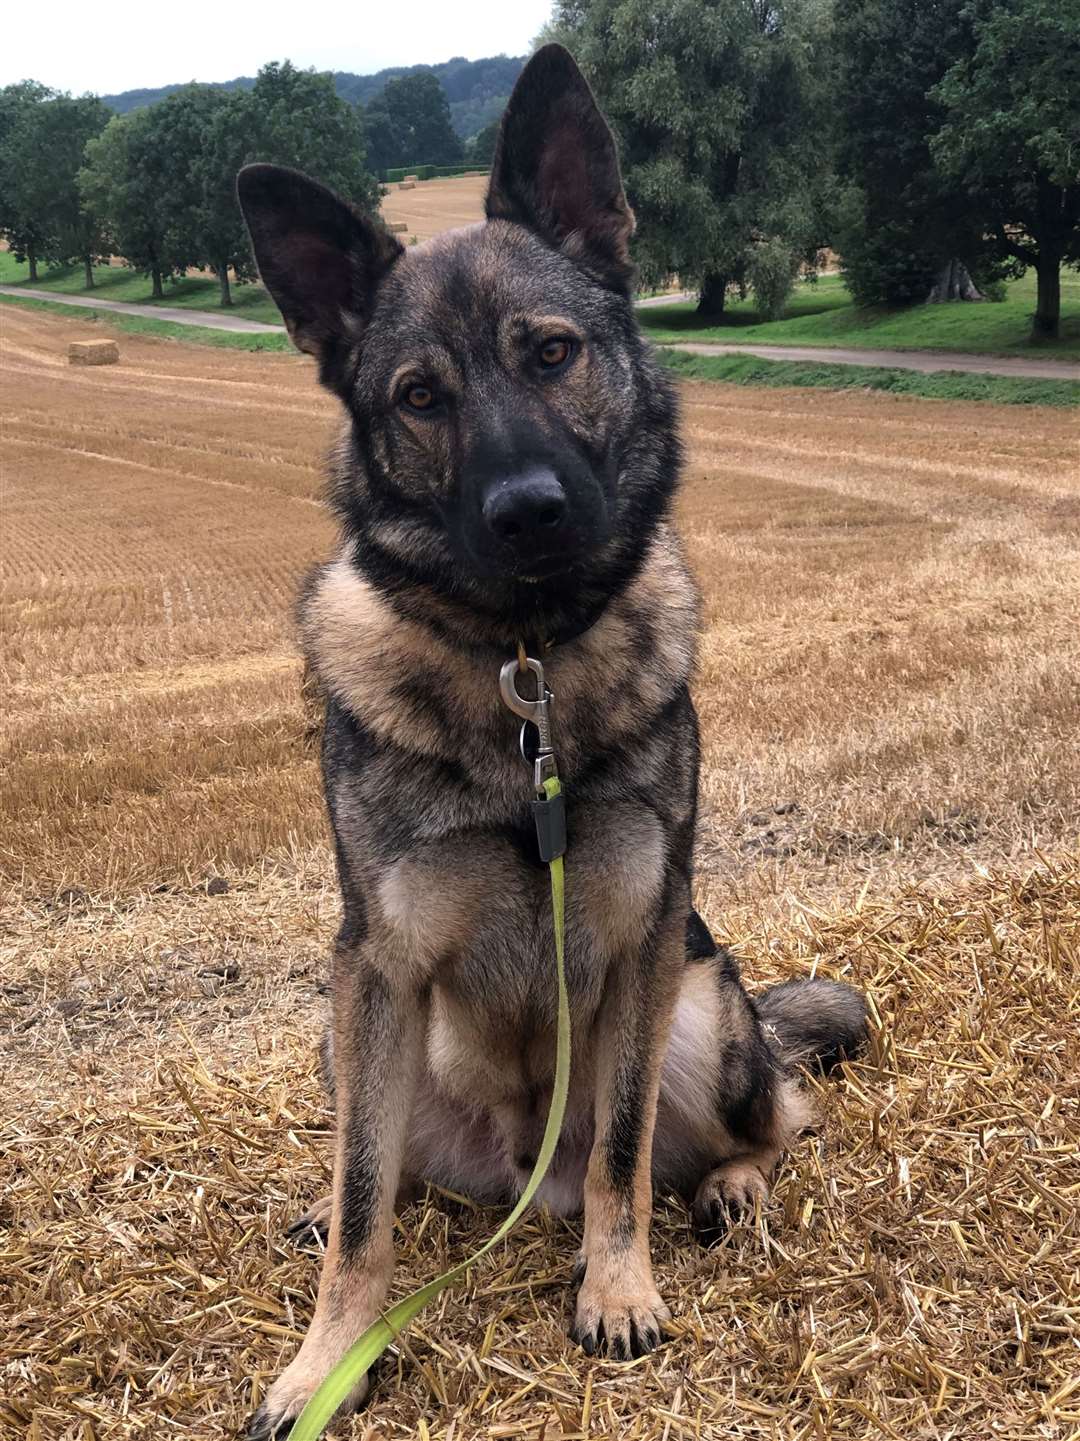 Police dog Biggy helped track down a metal thief in Larkfield. Image from Kent Police